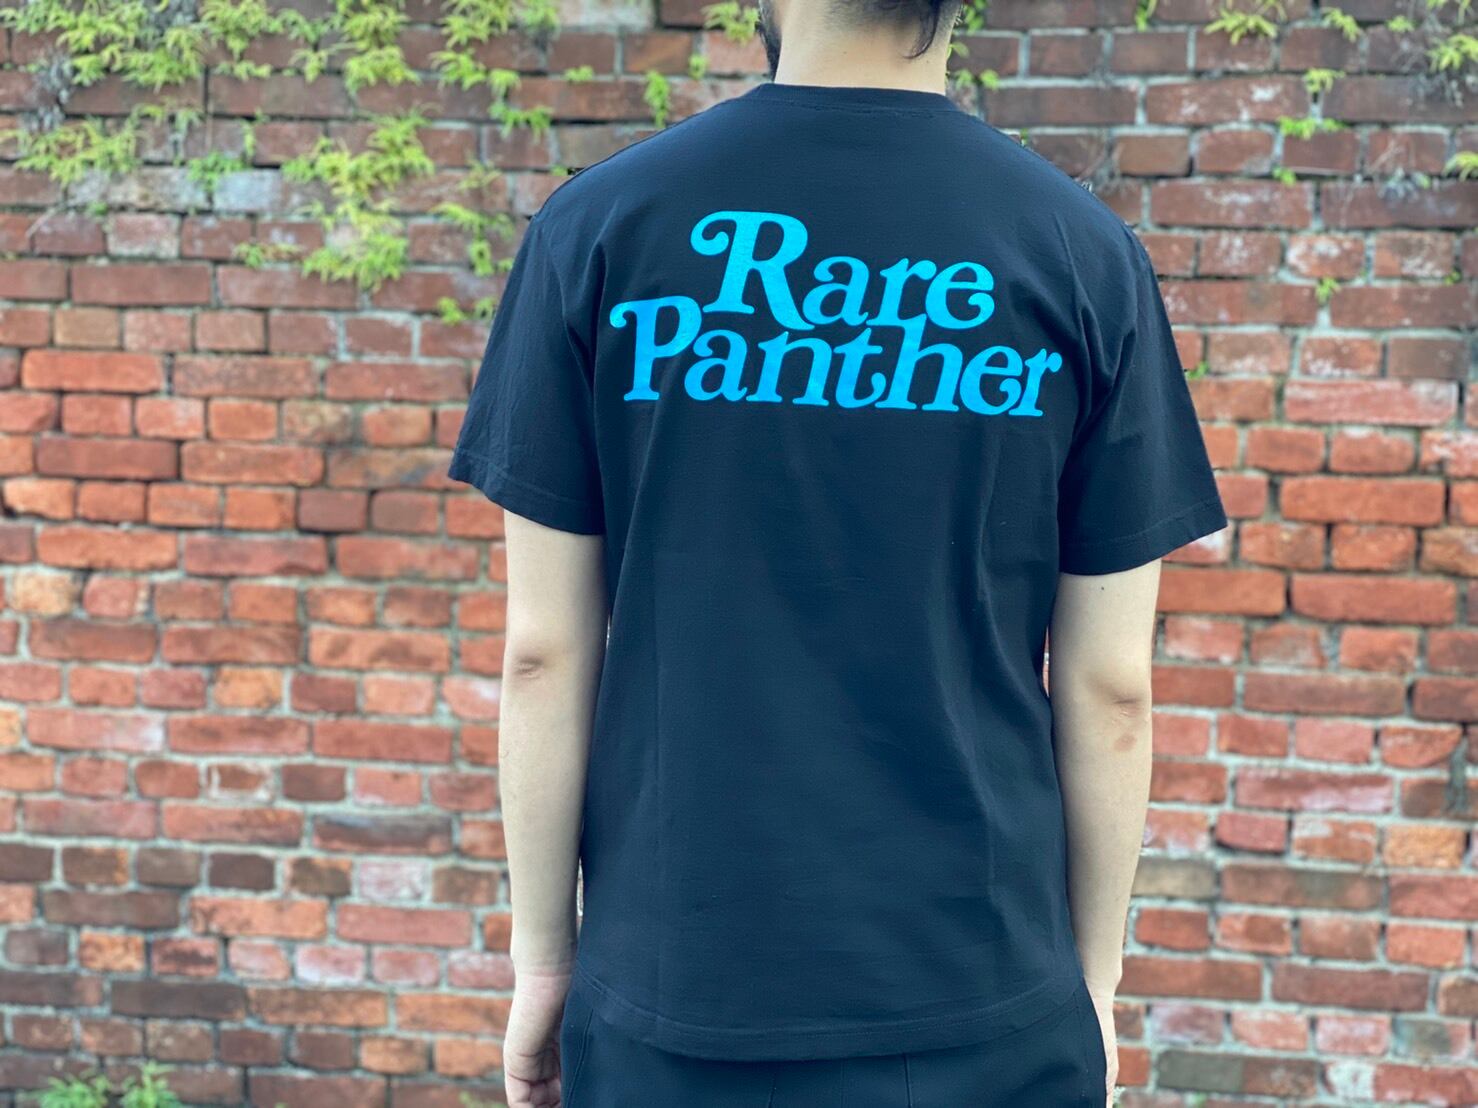 L RARE PANTHER Verdy harajukuday Tシャツ